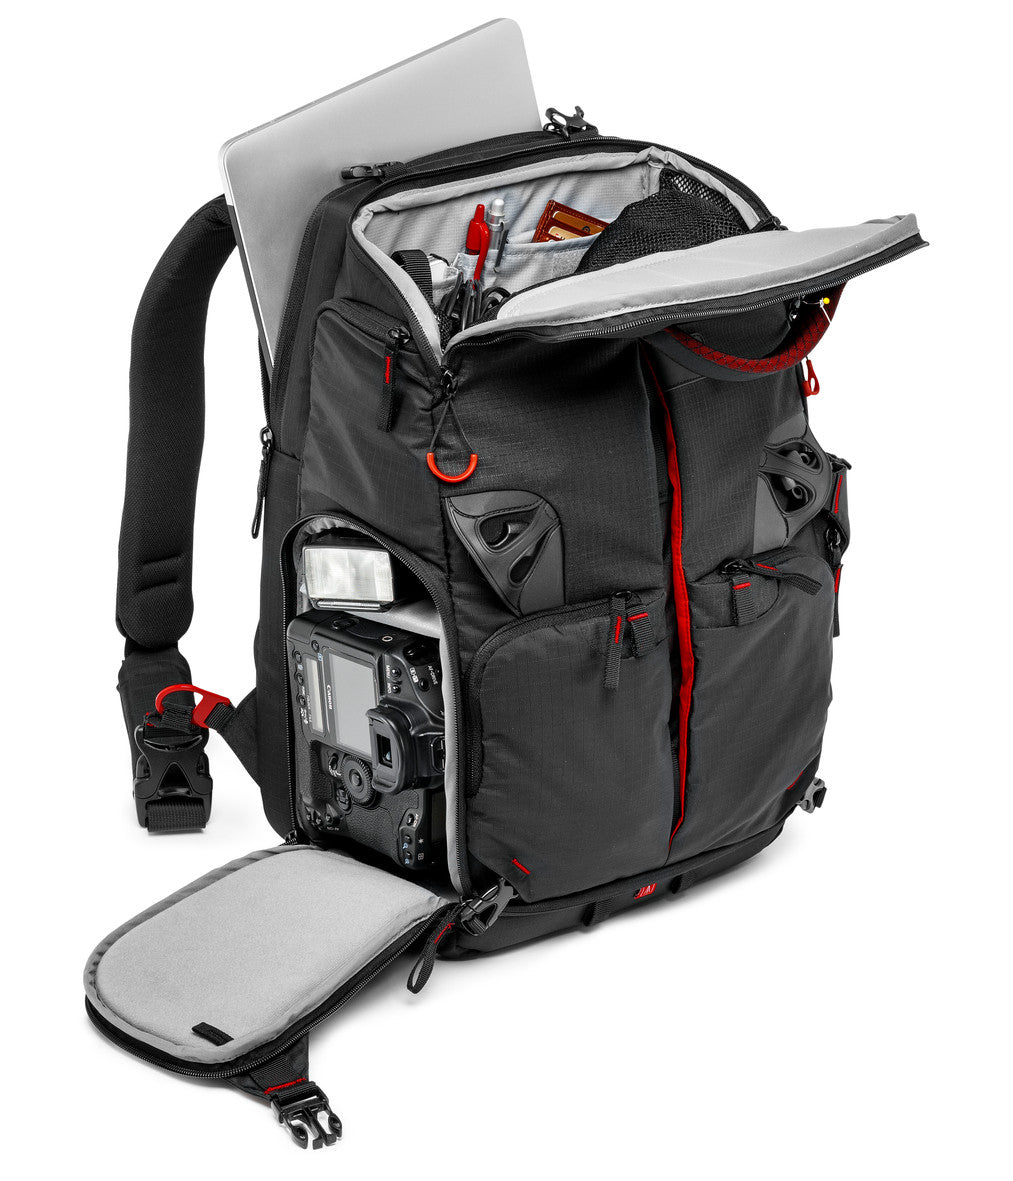 Manfrotto Pro-Light 3N1-25 Camera Backpack, discontinued, Manfrotto - Pictureline  - 3